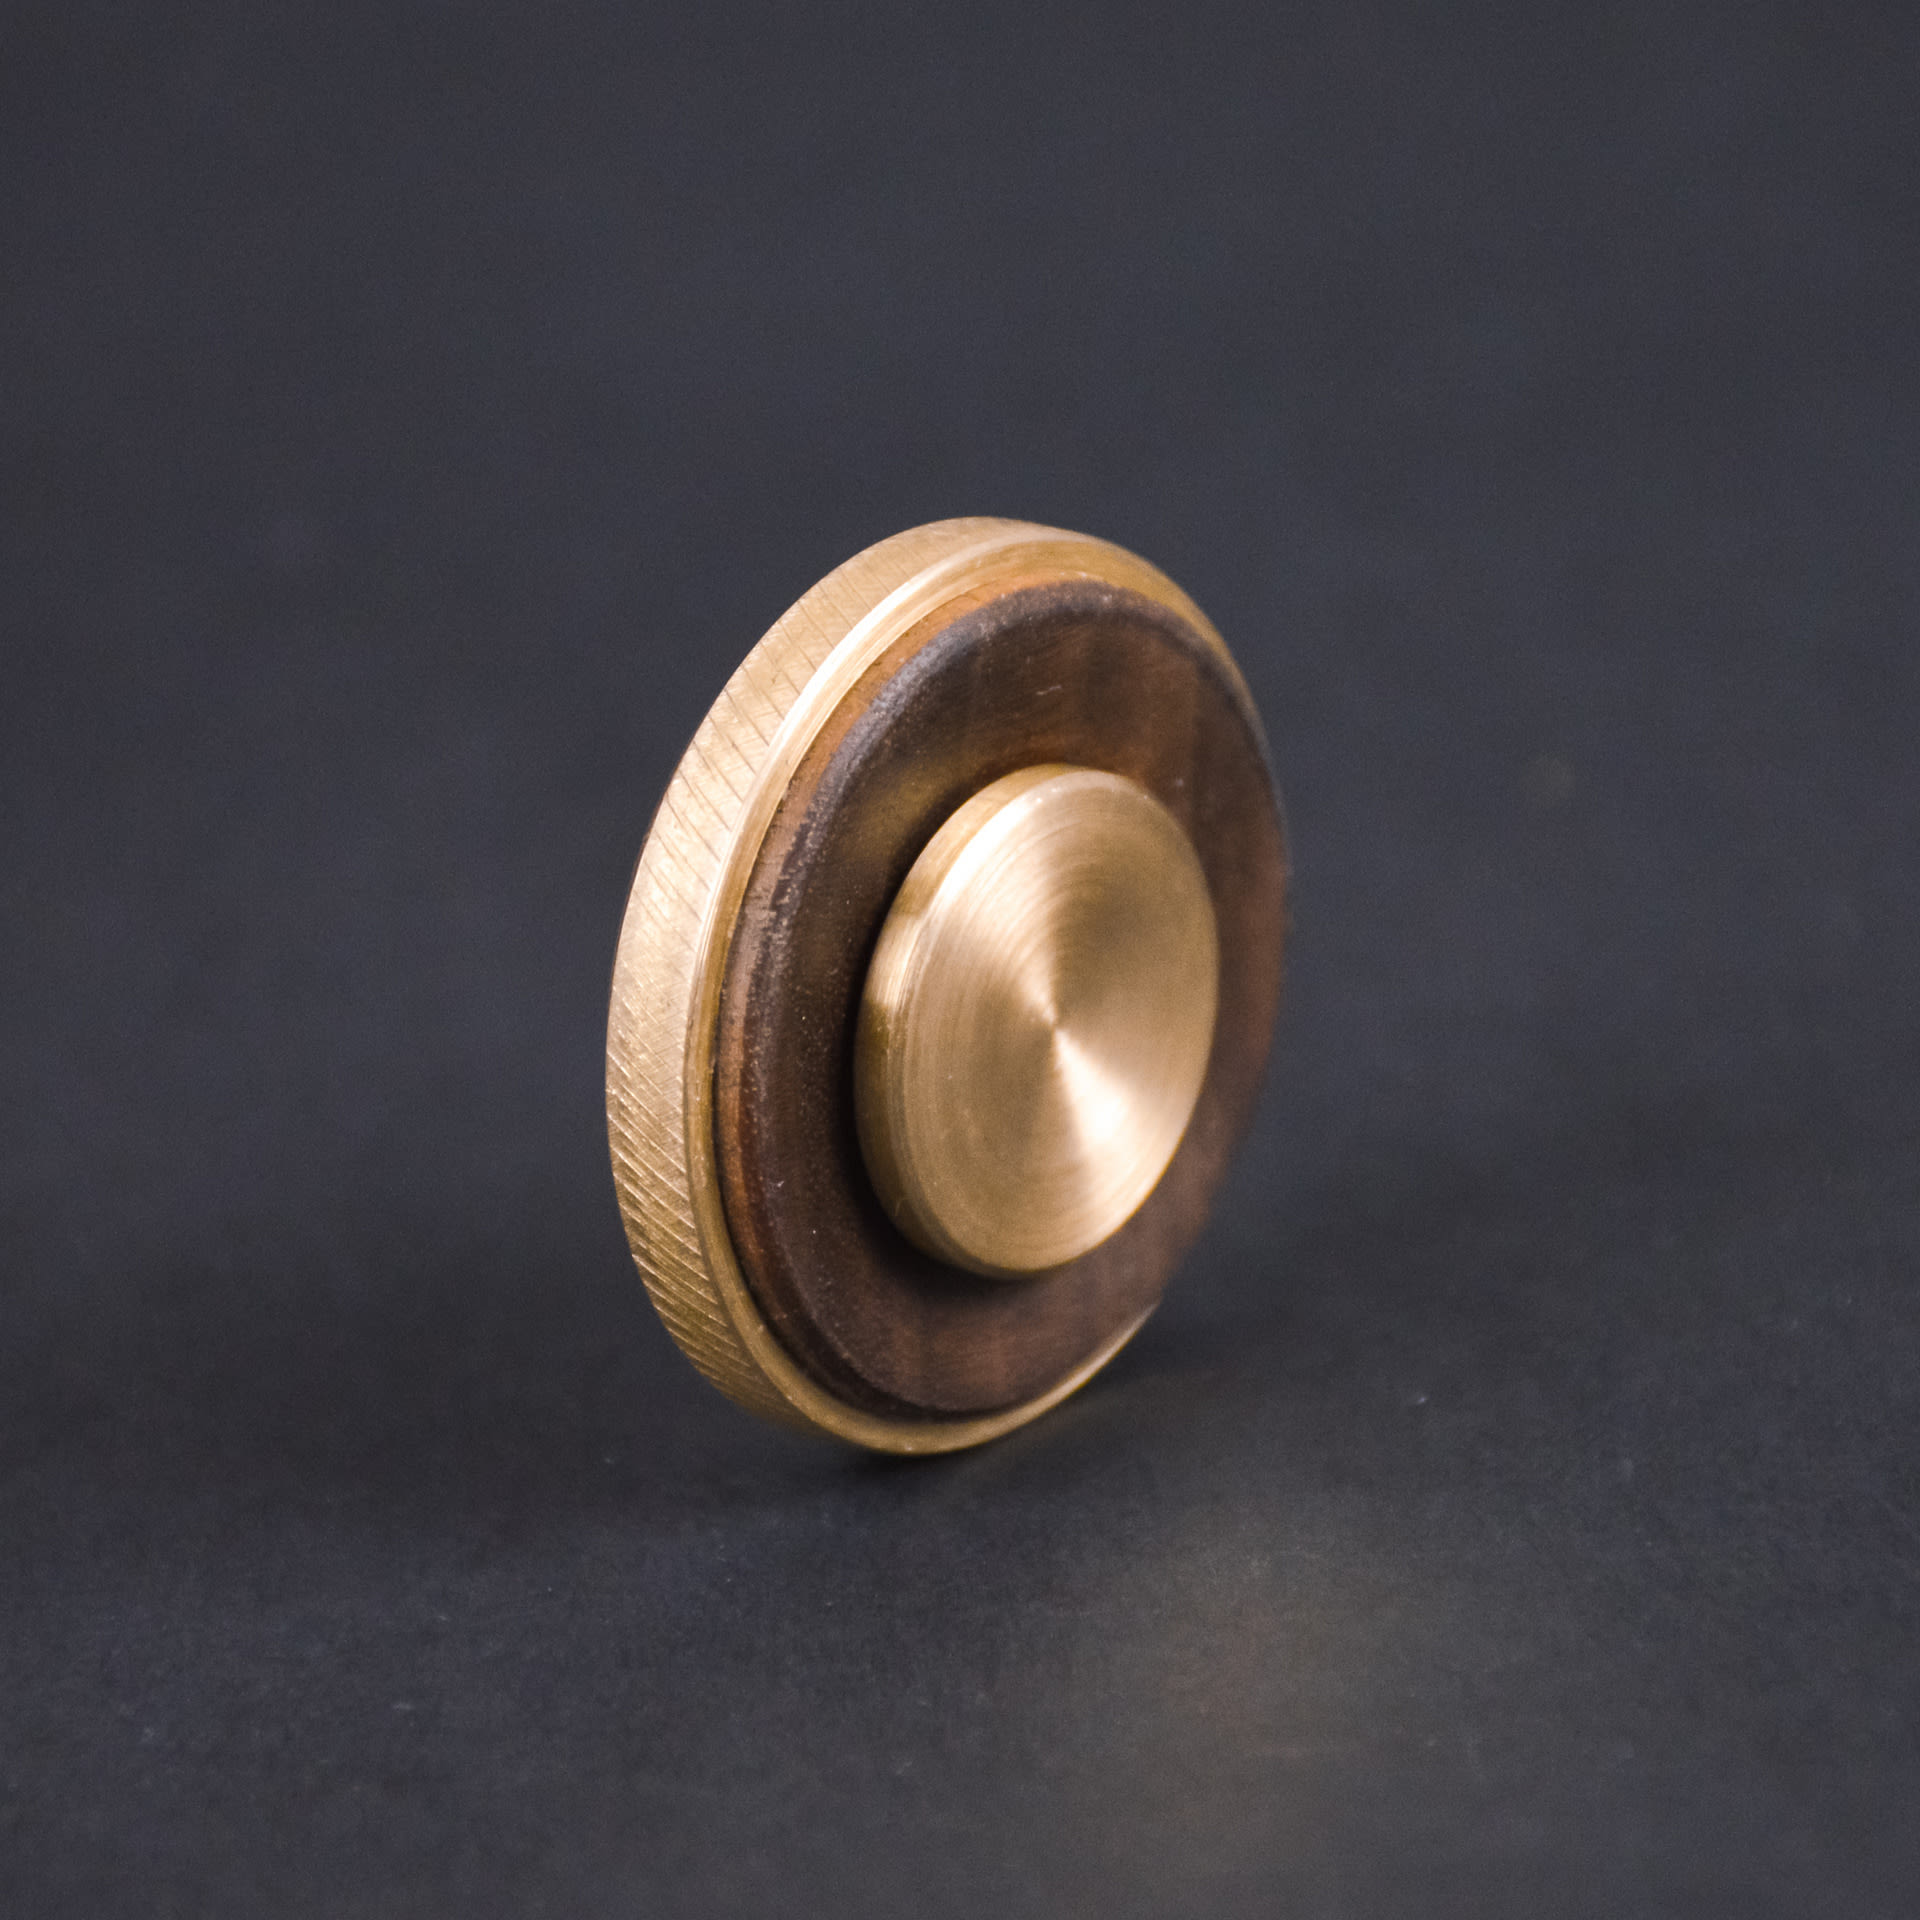 A wooden and brass coin